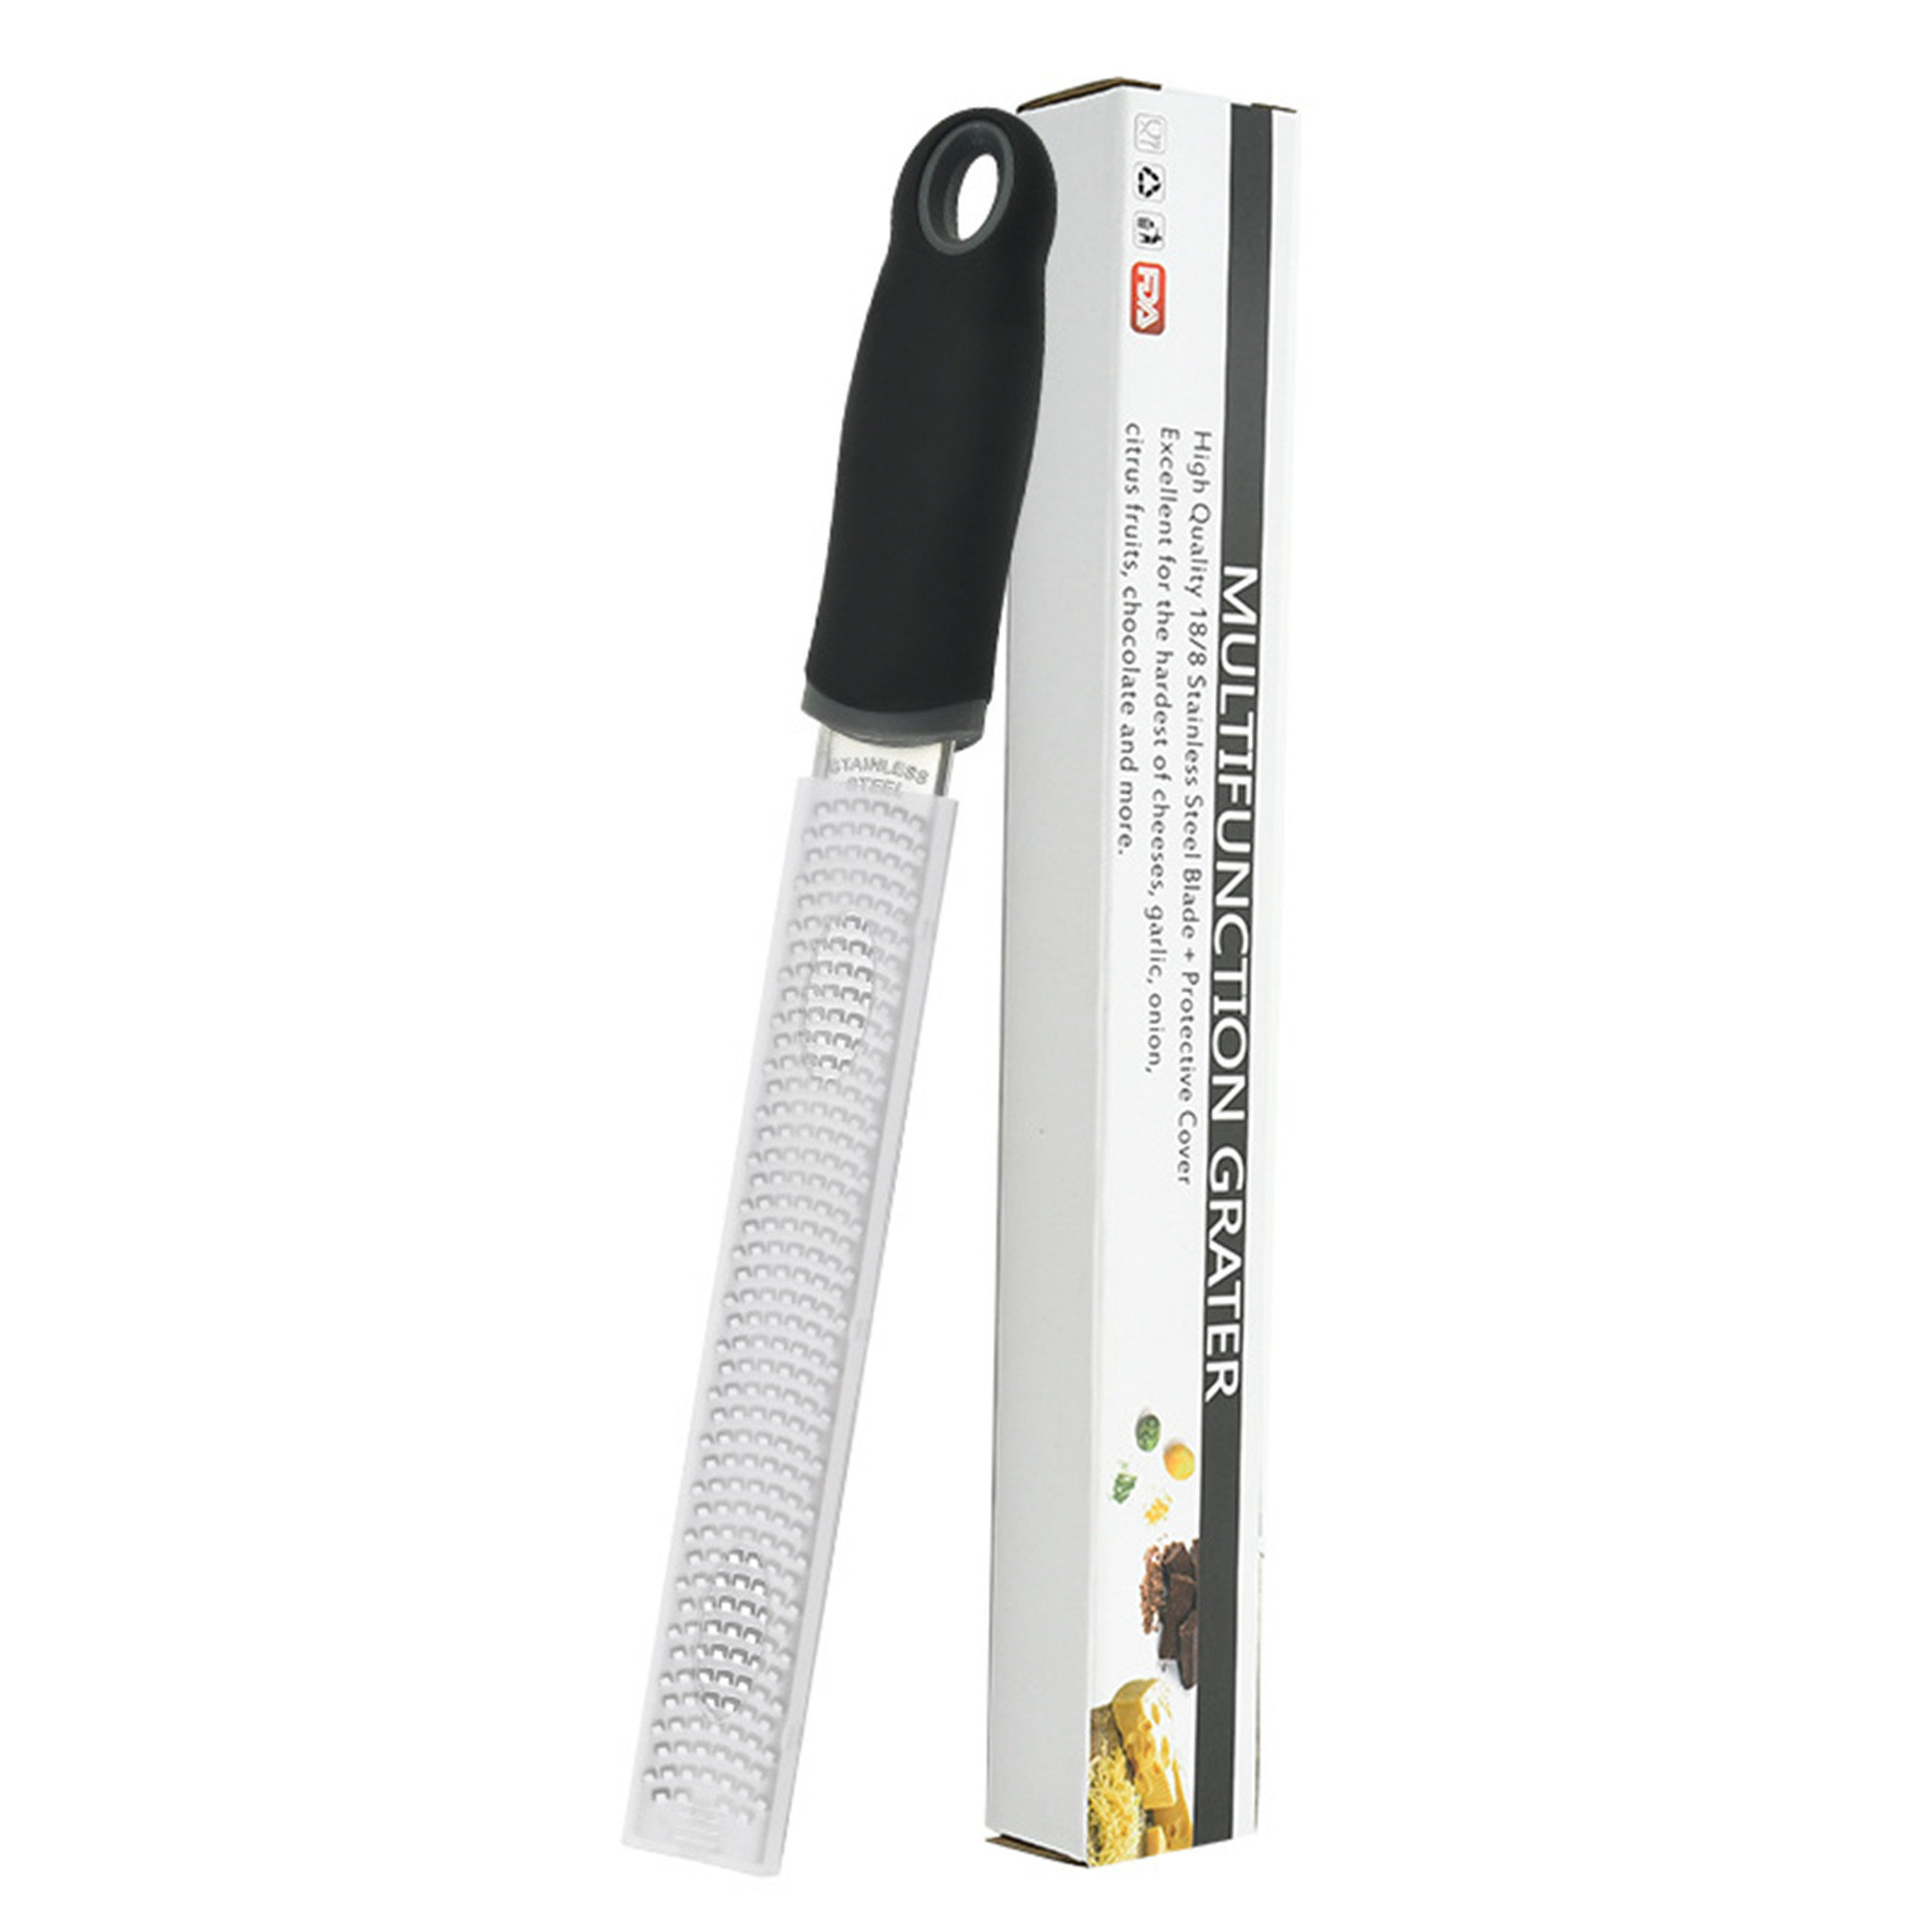 Grater Set of 2 Stainless Steel Steel Blade for Cheese 